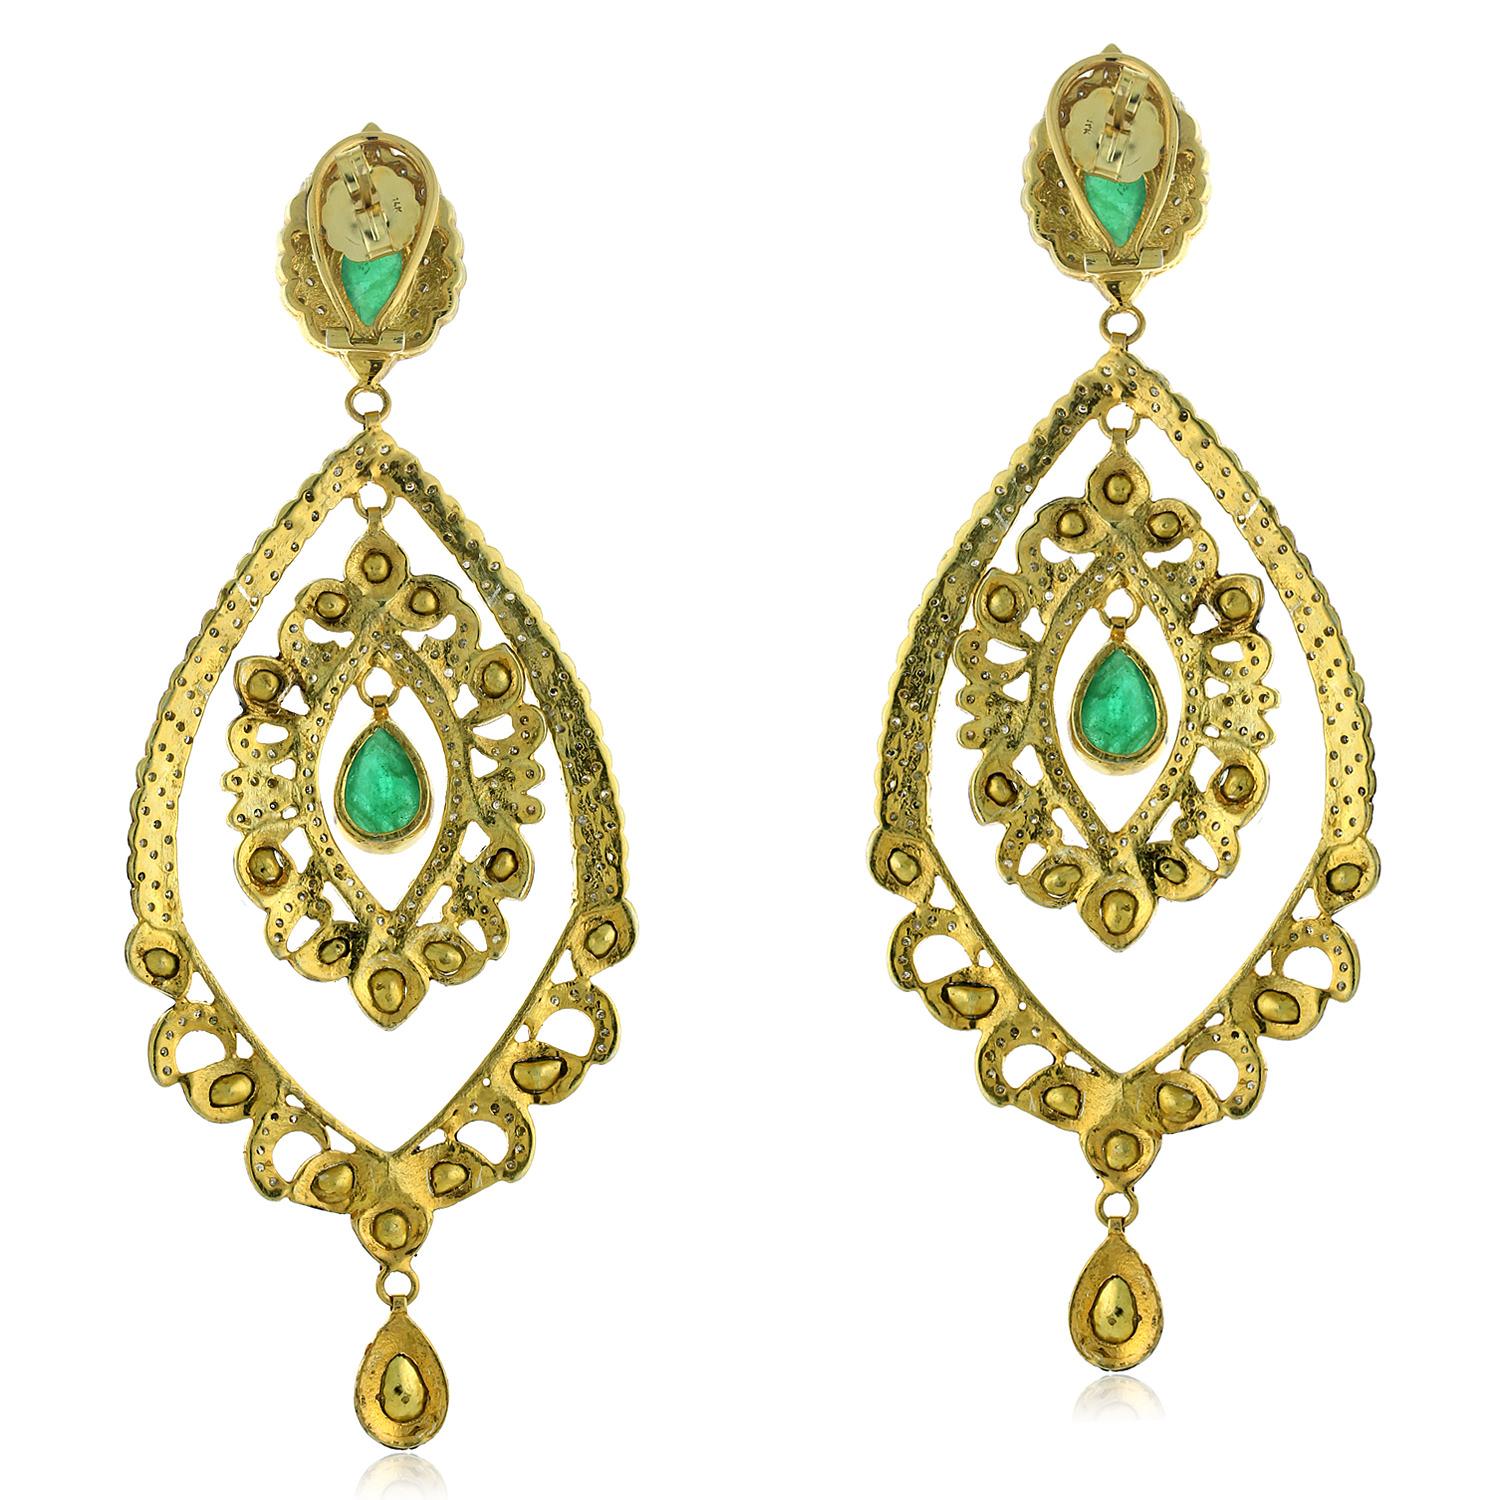 These earrings are typically made of gold or silver and feature emeralds and polki diamonds, which are uncut, natural diamonds that have a raw and rustic appearance. The earrings may also be accented with pave diamonds, which are small diamonds that